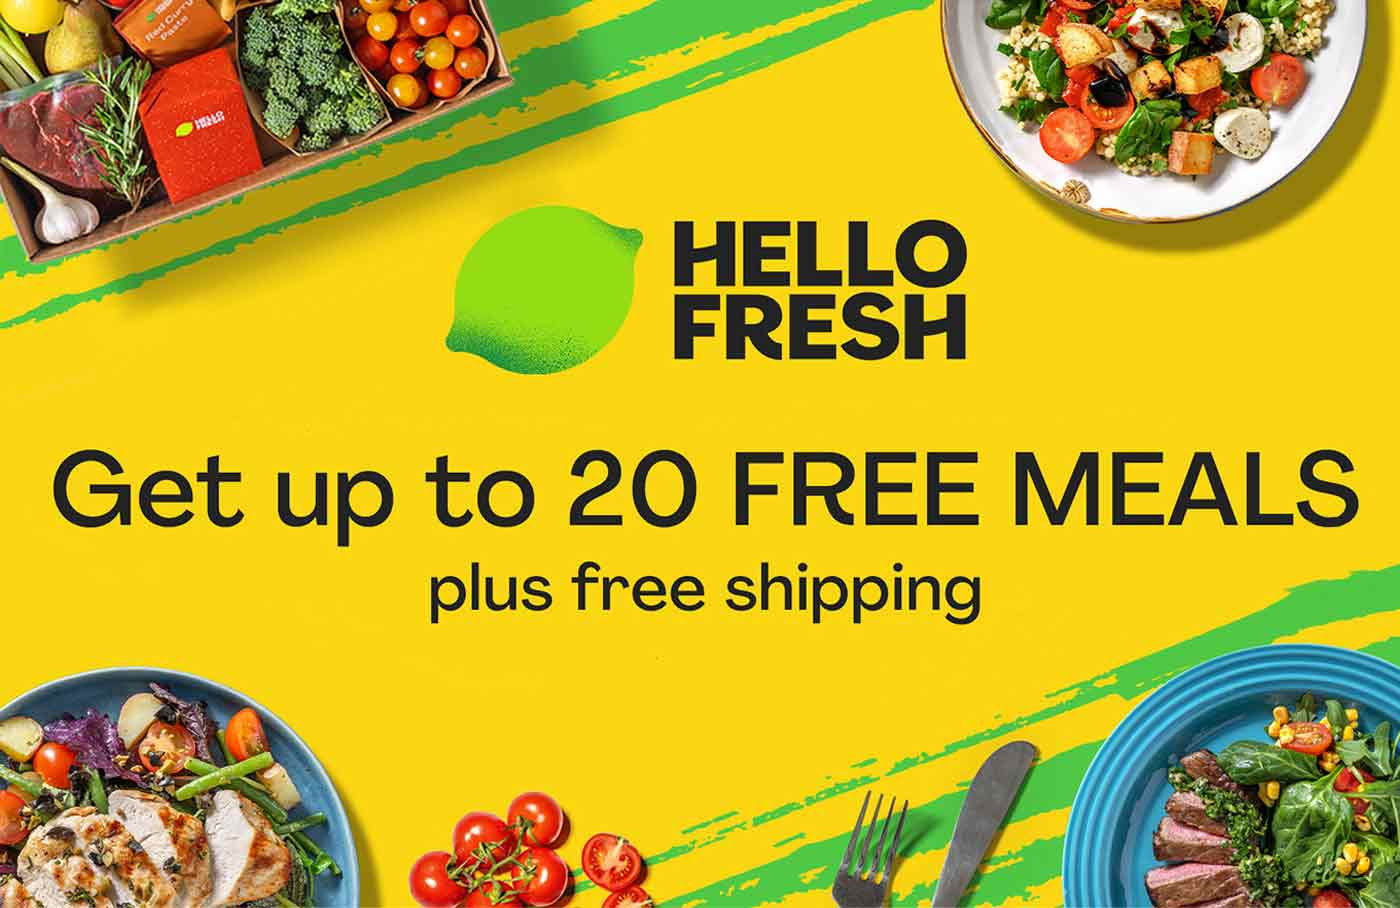 Get up to 20 free meals with
Hello Fresh.